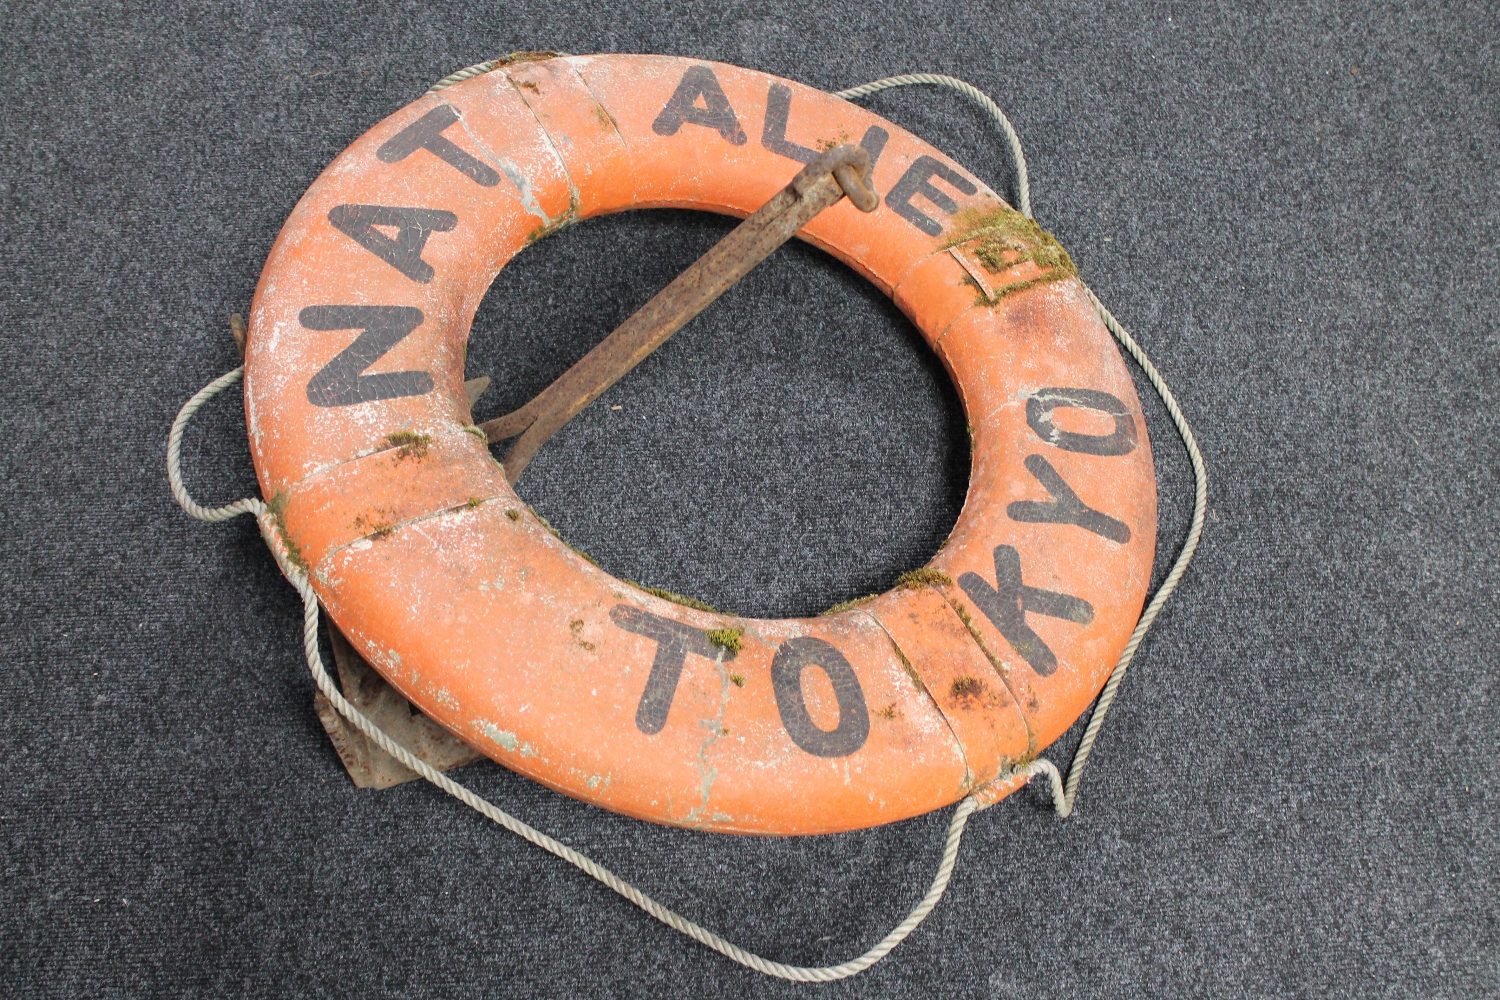 A cast iron anchor and a life ring from the Natalie Tokyo